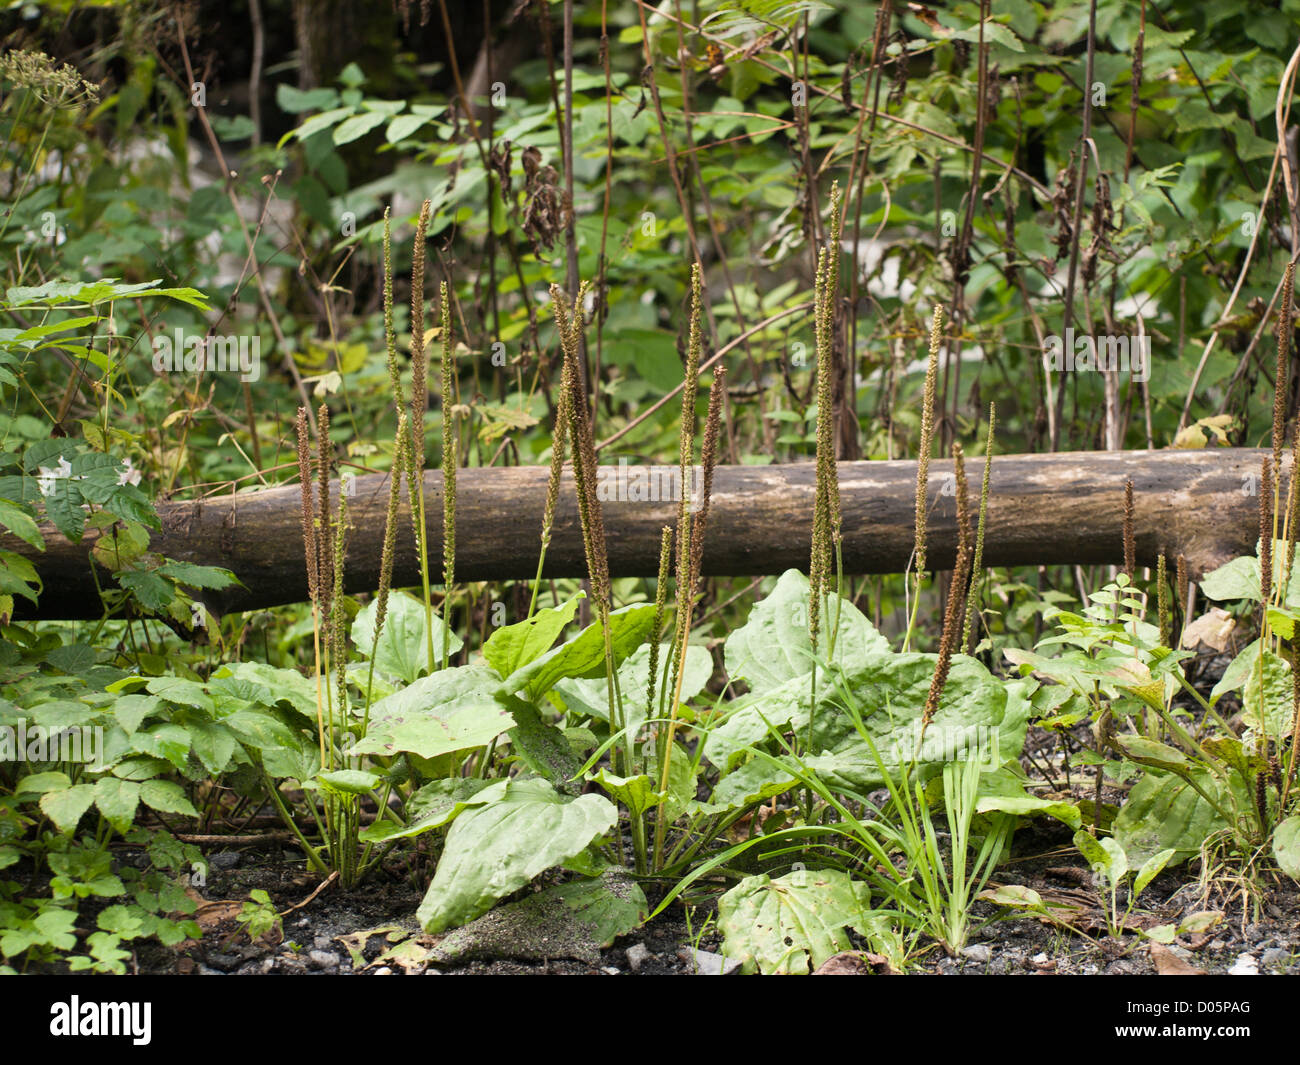 Plantago major, broadleaf plantain, making interesting patterns in the forests surrounding Oslo Norway Stock Photo